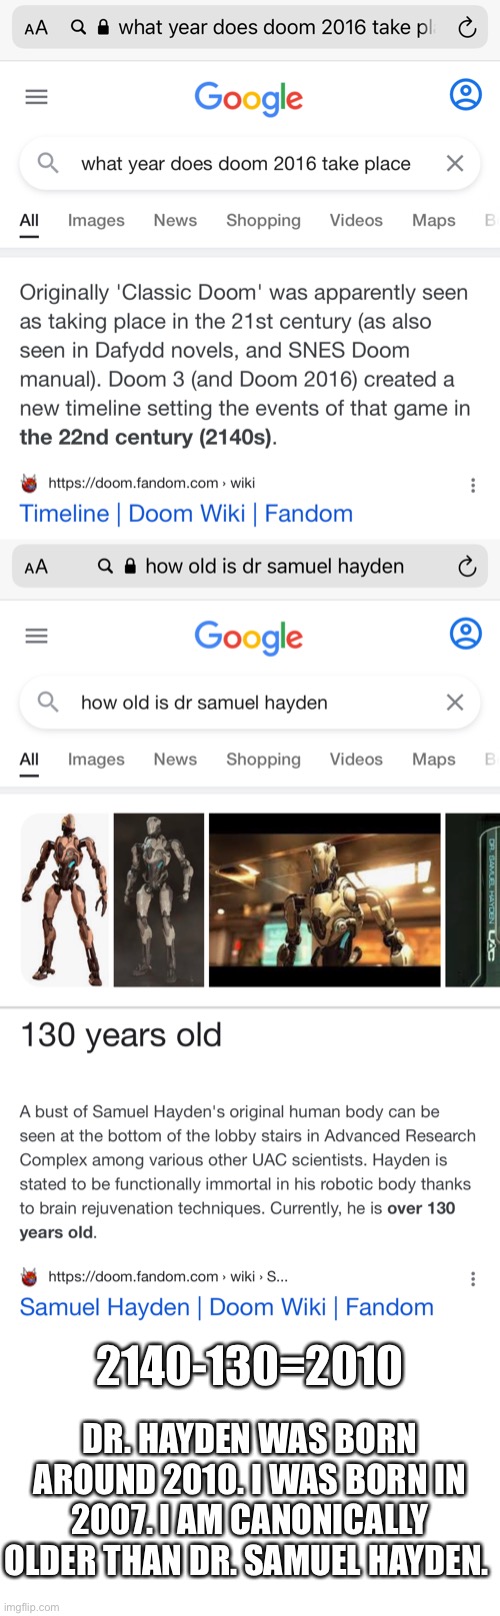 Maybe I will be the next Dr. Hayden :o | 2140-130=2010; DR. HAYDEN WAS BORN AROUND 2010. I WAS BORN IN 2007. I AM CANONICALLY OLDER THAN DR. SAMUEL HAYDEN. | image tagged in dr samuel hayden,doom,well shit,oh wow are you actually reading these tags,my last name isnt hayden,not yet anyway | made w/ Imgflip meme maker